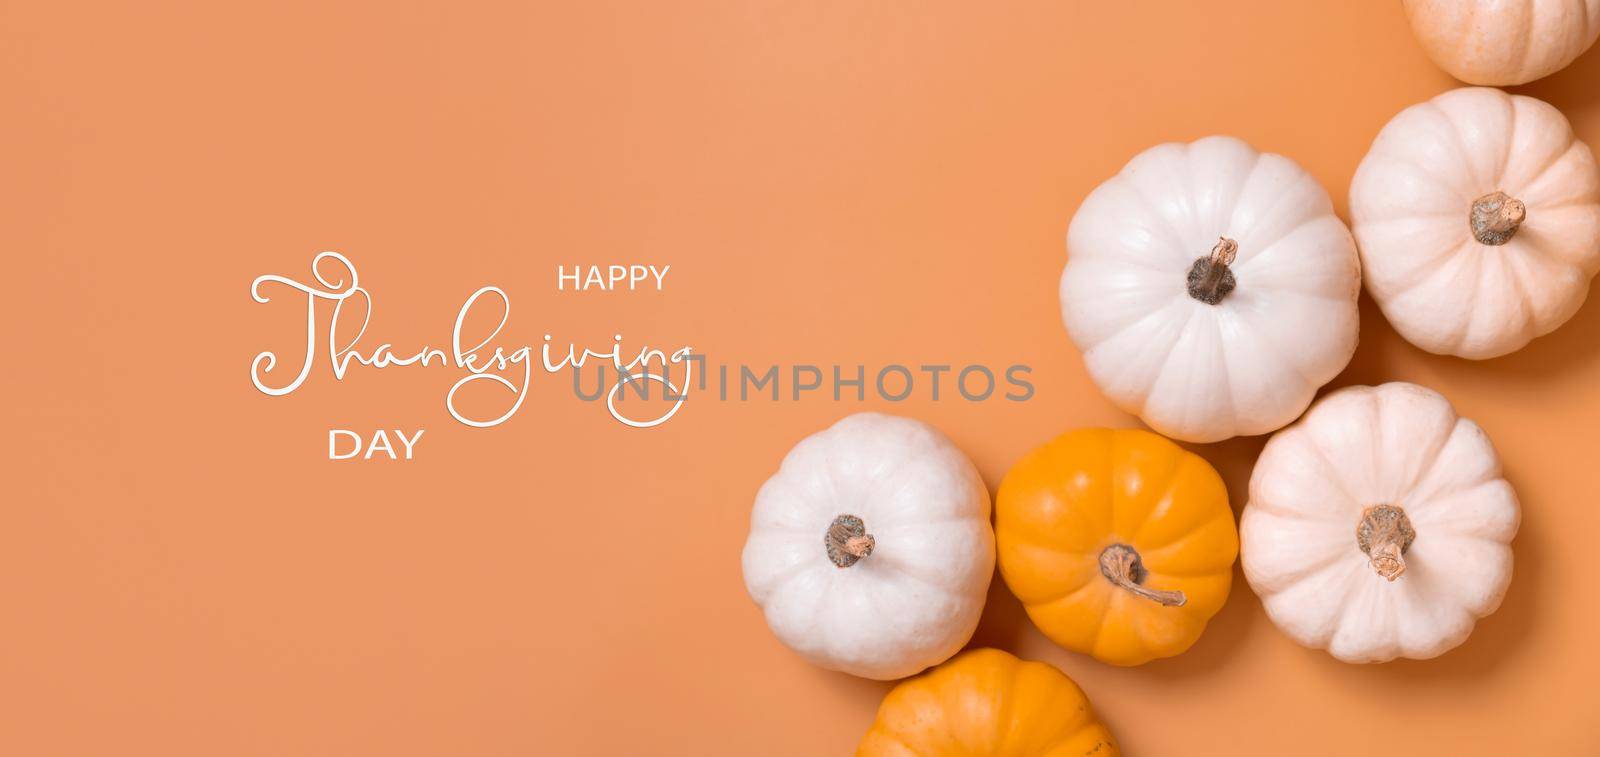 Banner with text Happy Thanksgiving Day and group of decorative pumpkins top view on orange background